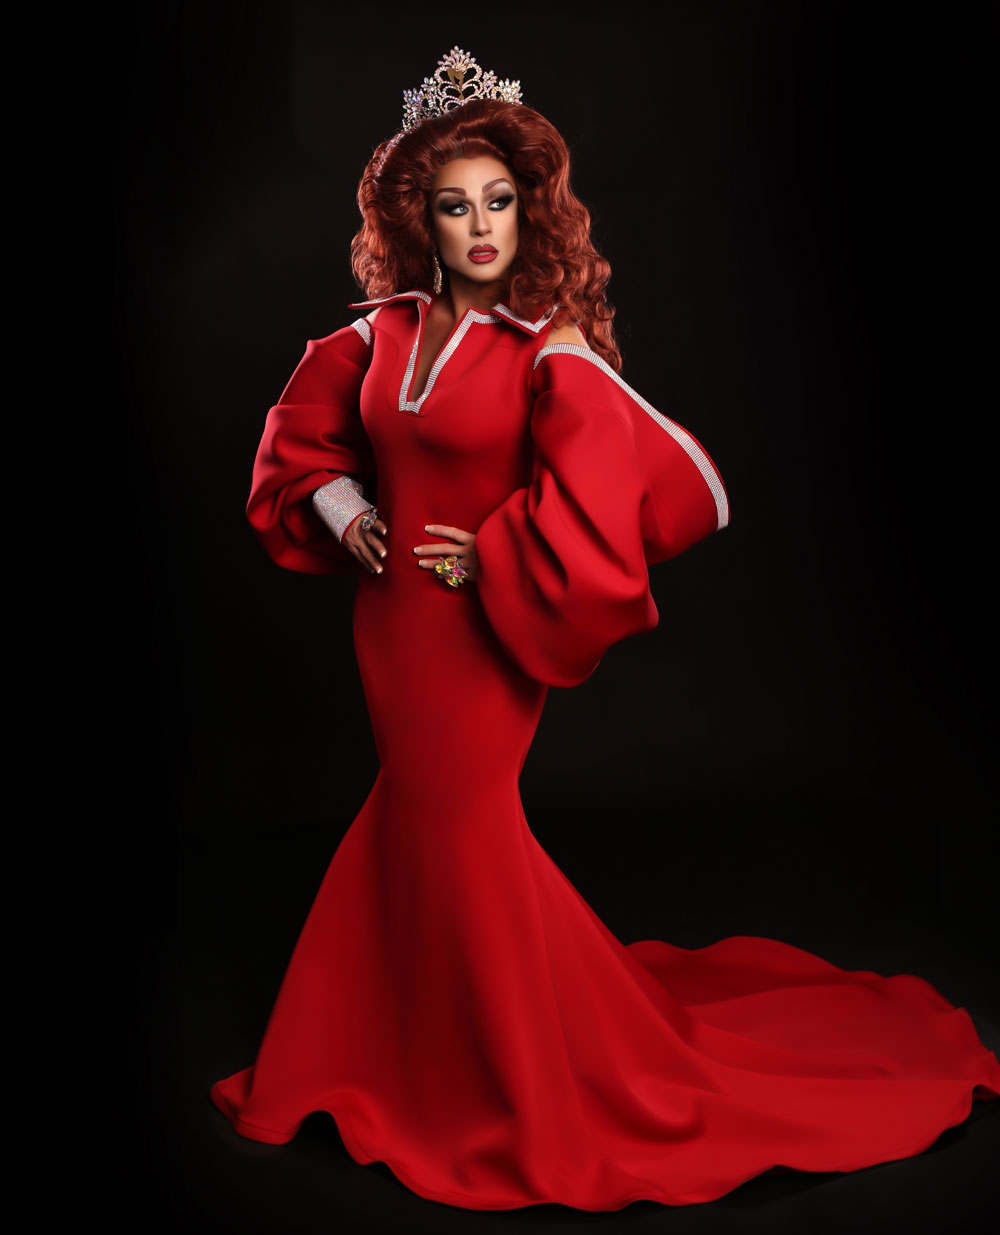 Female Impersonator Evening Gowns